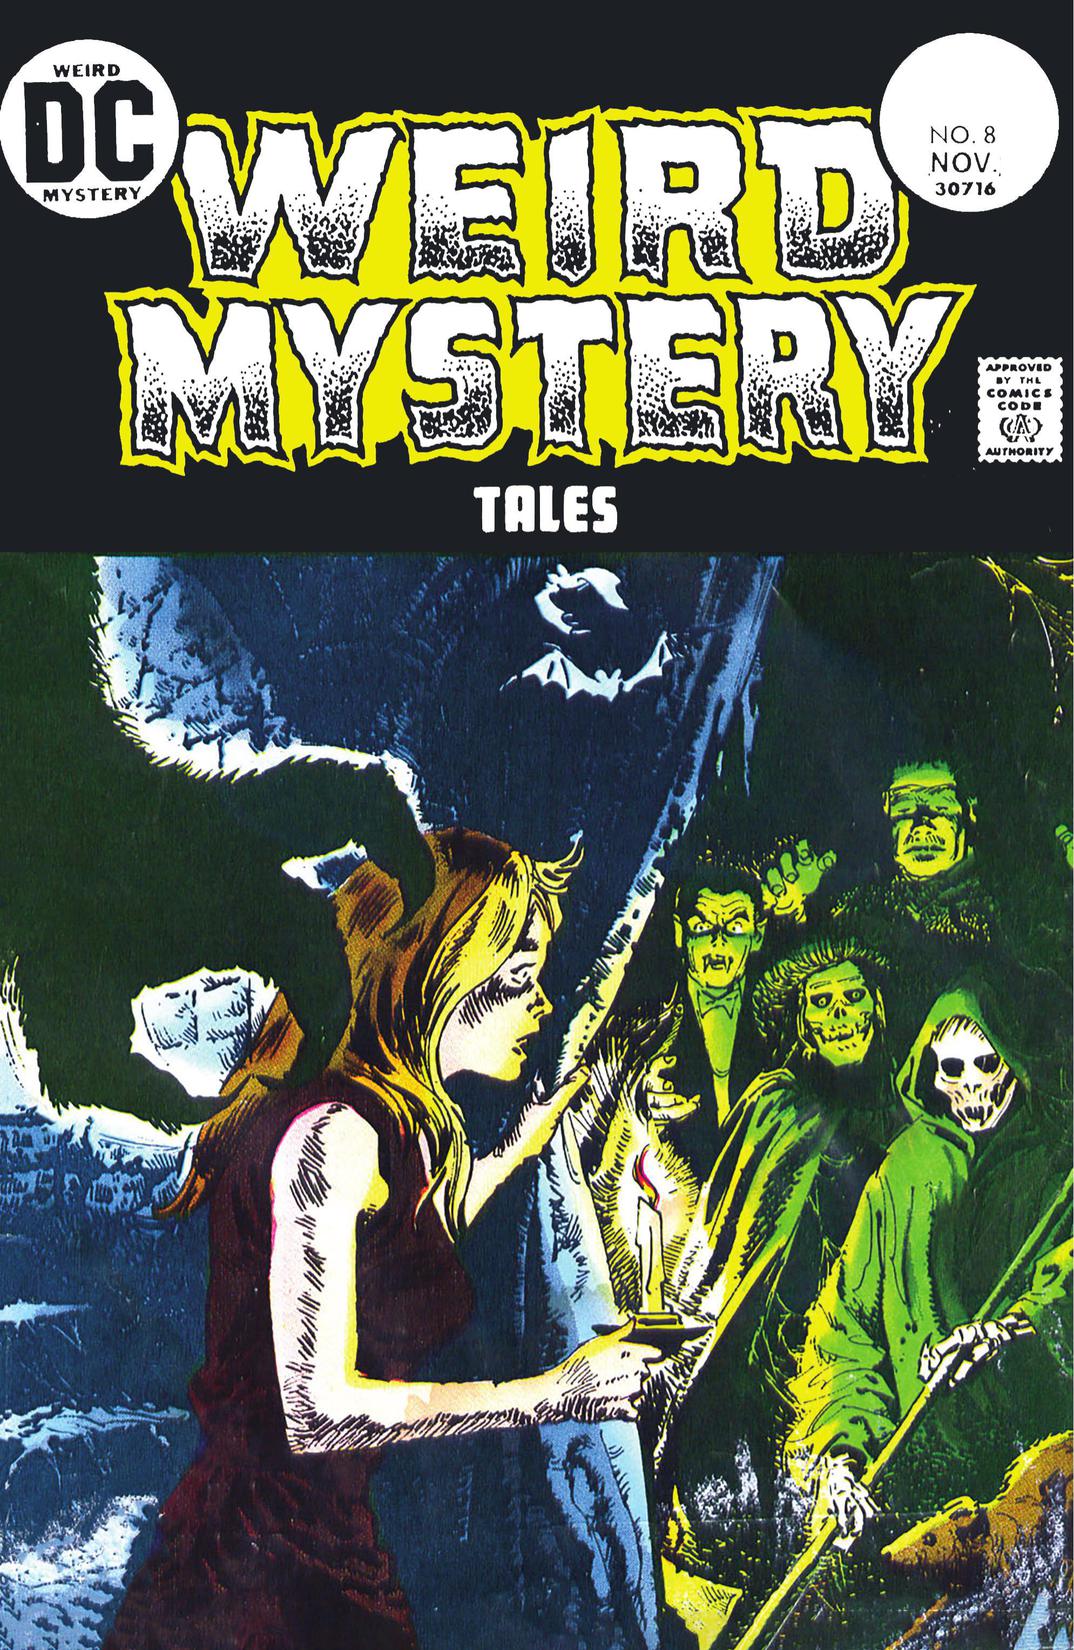 Weird Mystery Tales #8 preview images